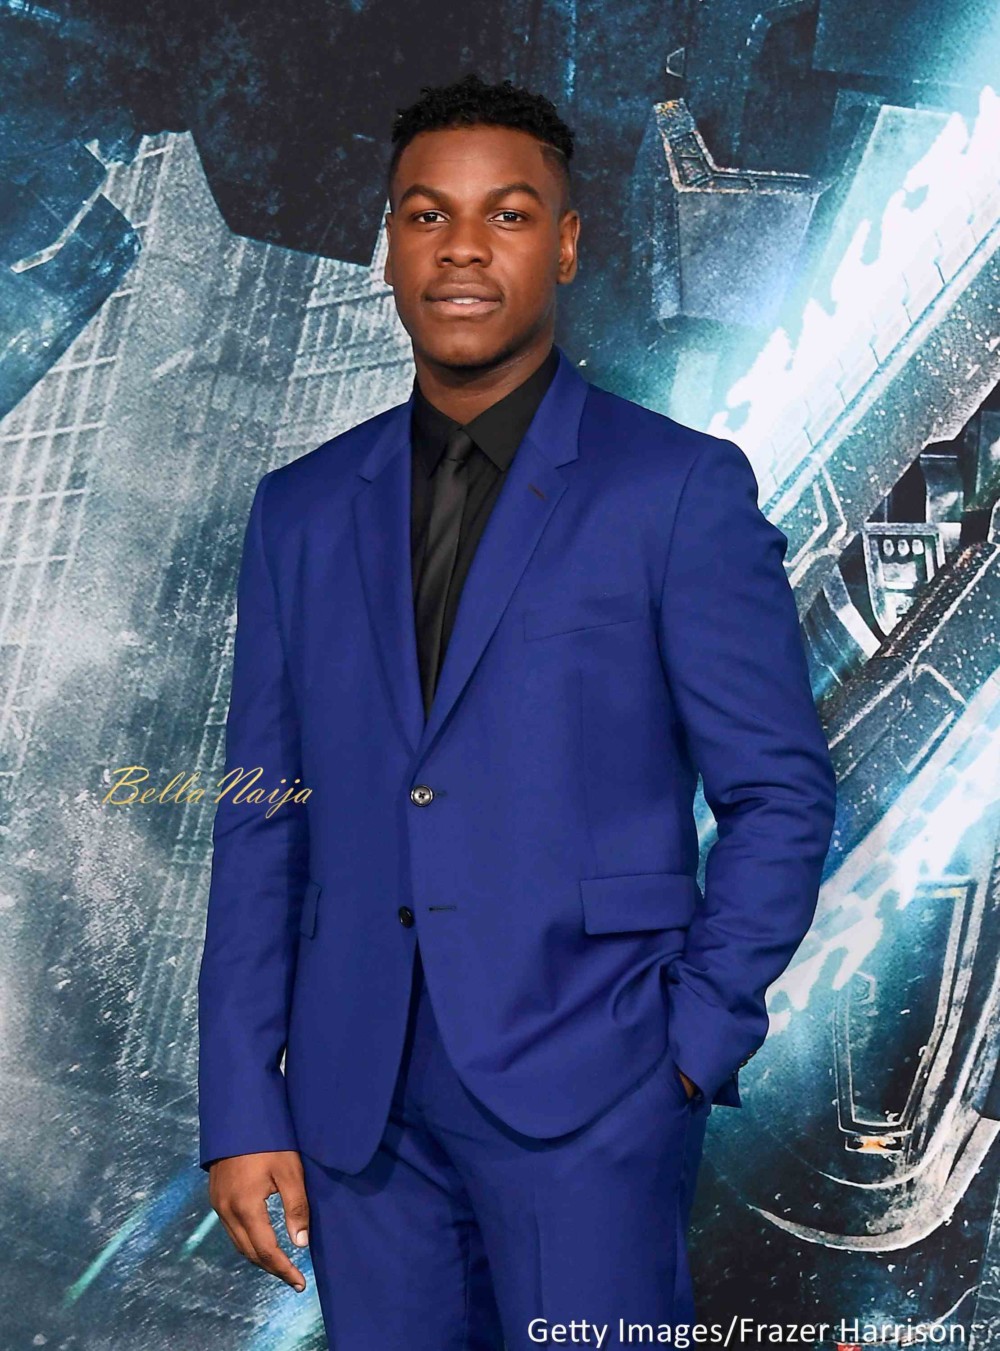 "I designed Jake—from his haircut to his look" - John Boyega discusses "Pacific Rim Uprising" on ELLE